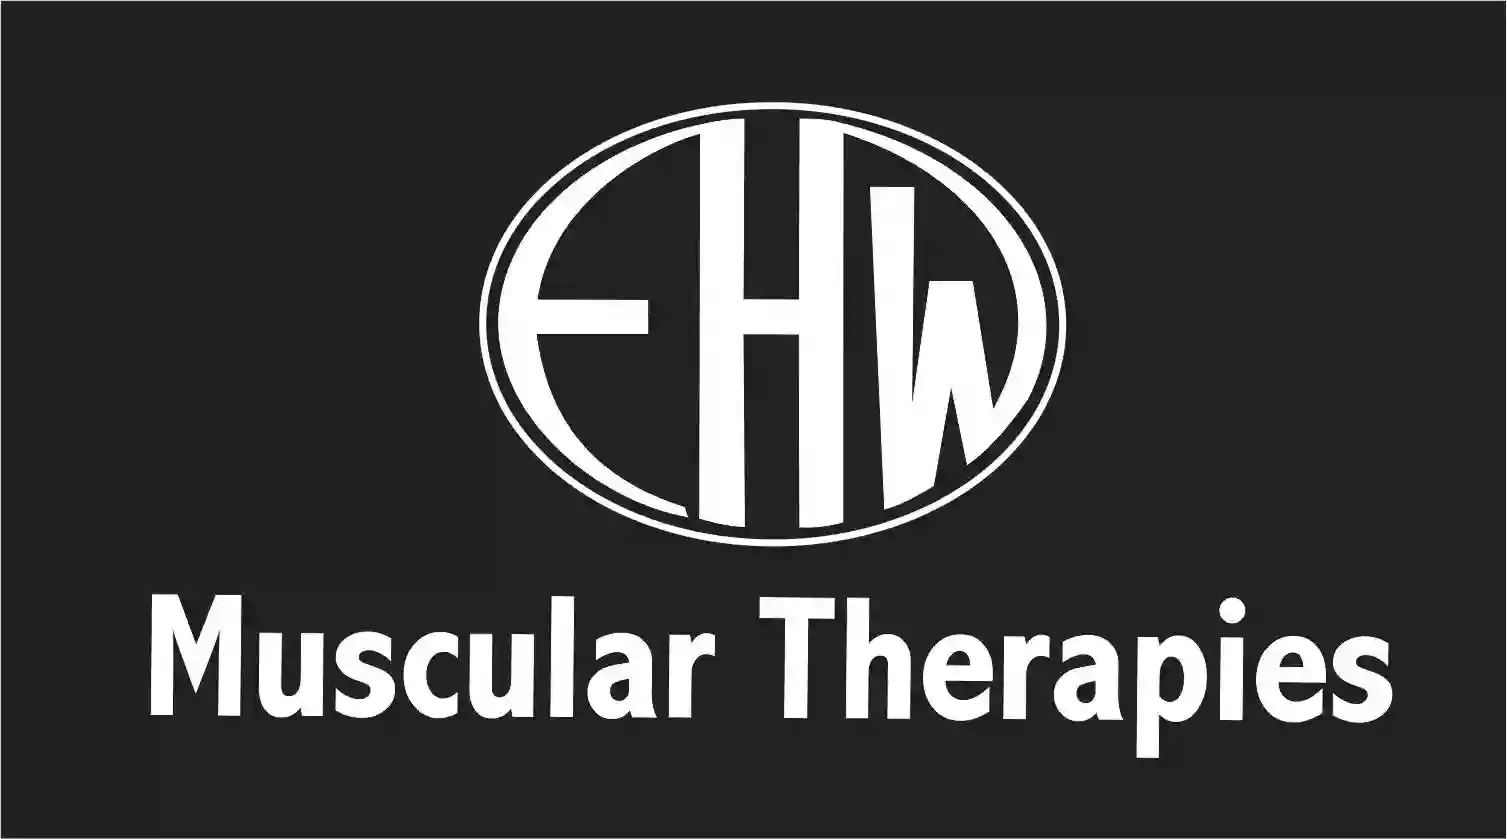 EHW Muscular Therapies